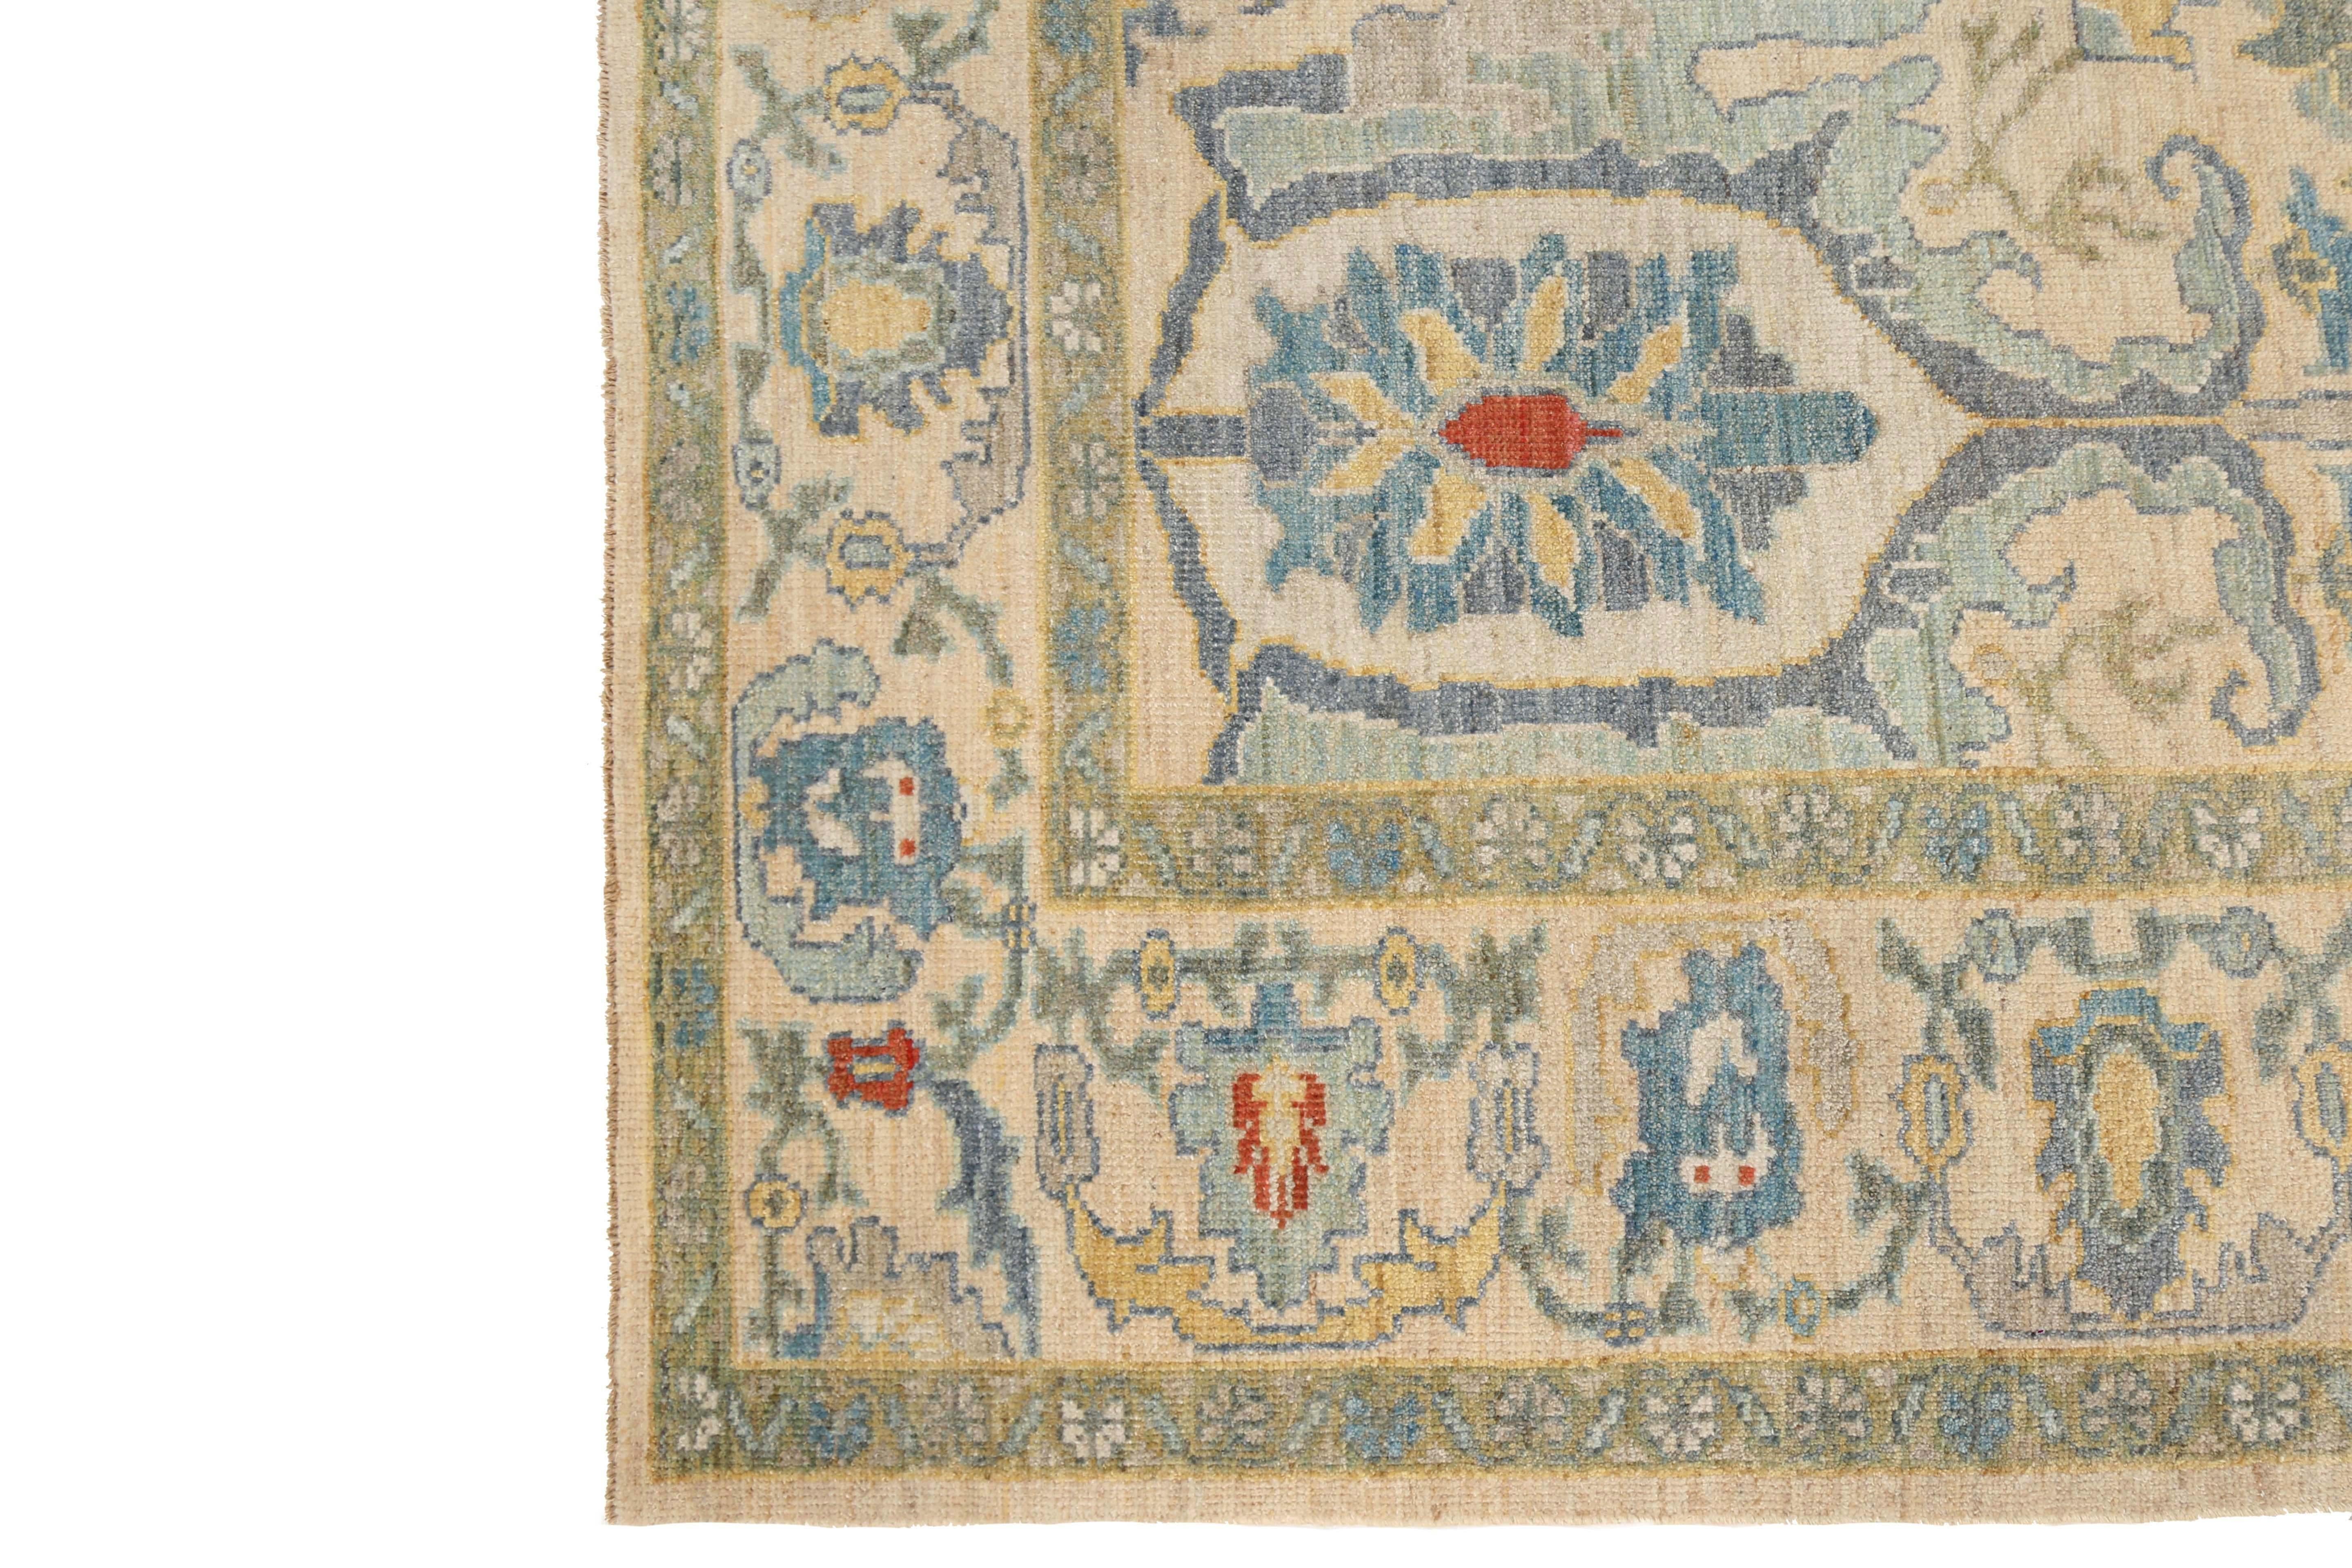 Introducing our stunning handmade Turkish Sultanabad rug, measuring 9'1'' by 12'0''! This exquisite piece features a cream background with vibrant pops of yellow, blue, navy, and red in the intricate design. The visible border seamlessly blends into